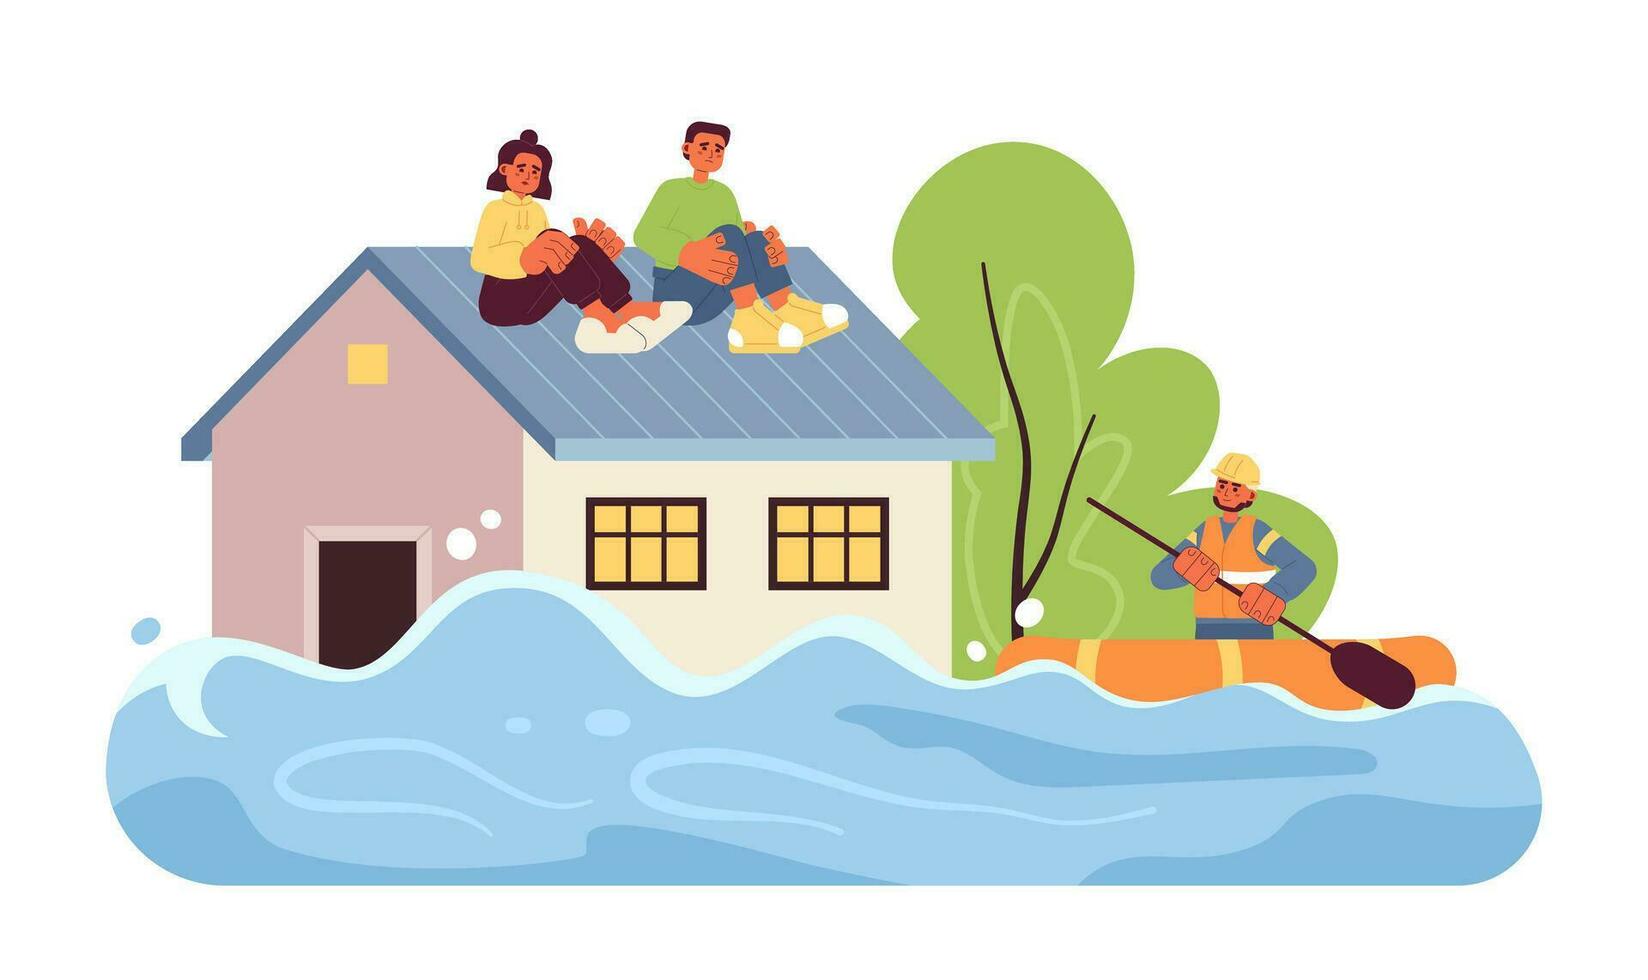 Flood flat concept vector spot illustration. People sitting on roof. Rescue mission. Flowing water 2D cartoon scene on white for web UI design. Natural disaster isolated editable creative image